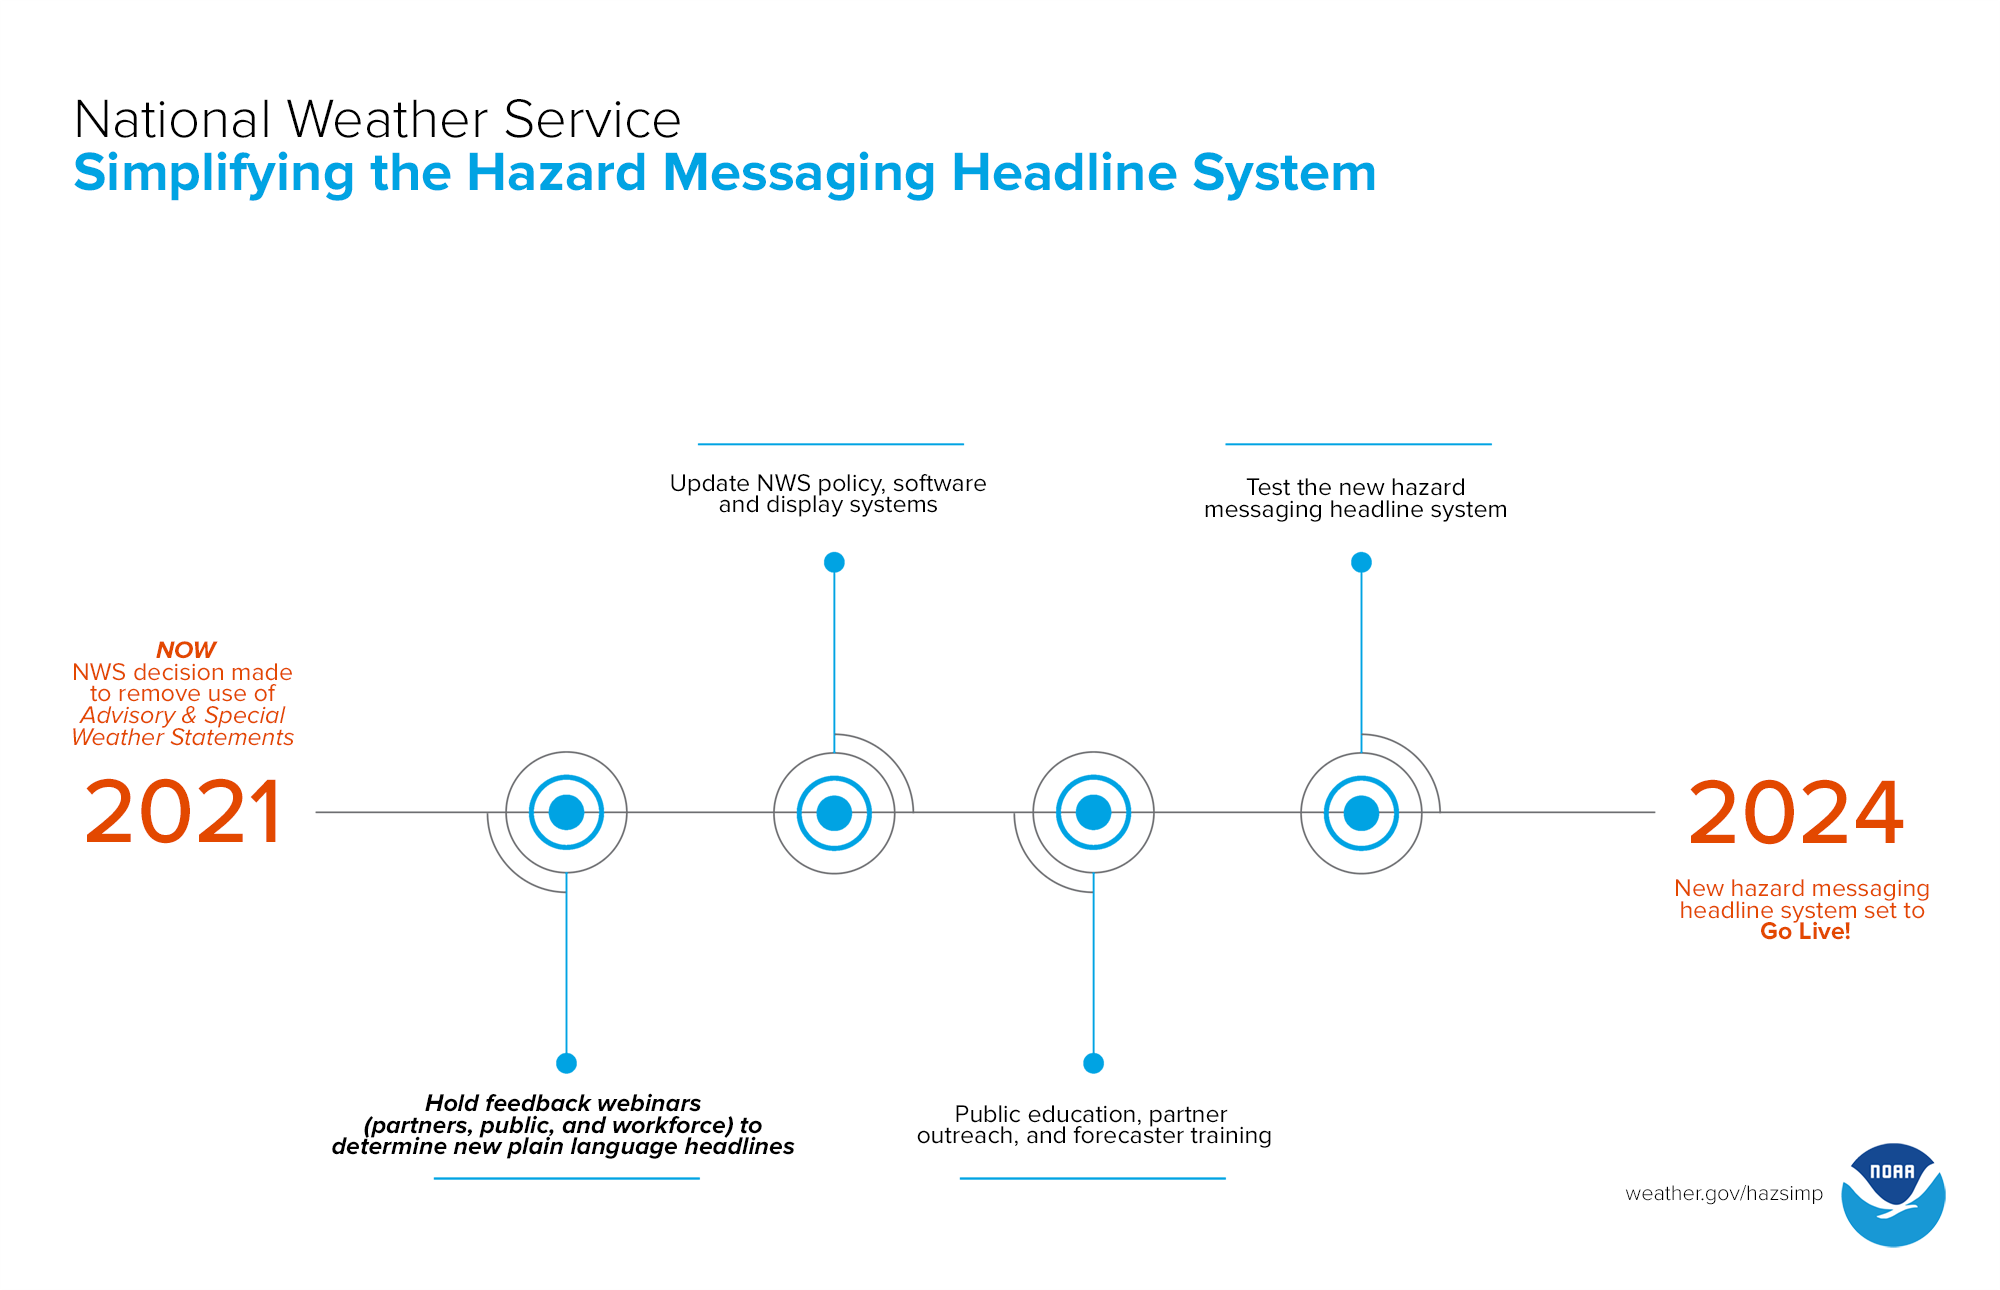 Shown here is the timeline for the process of upcoming major changes to NWS hazard messaging headlines.